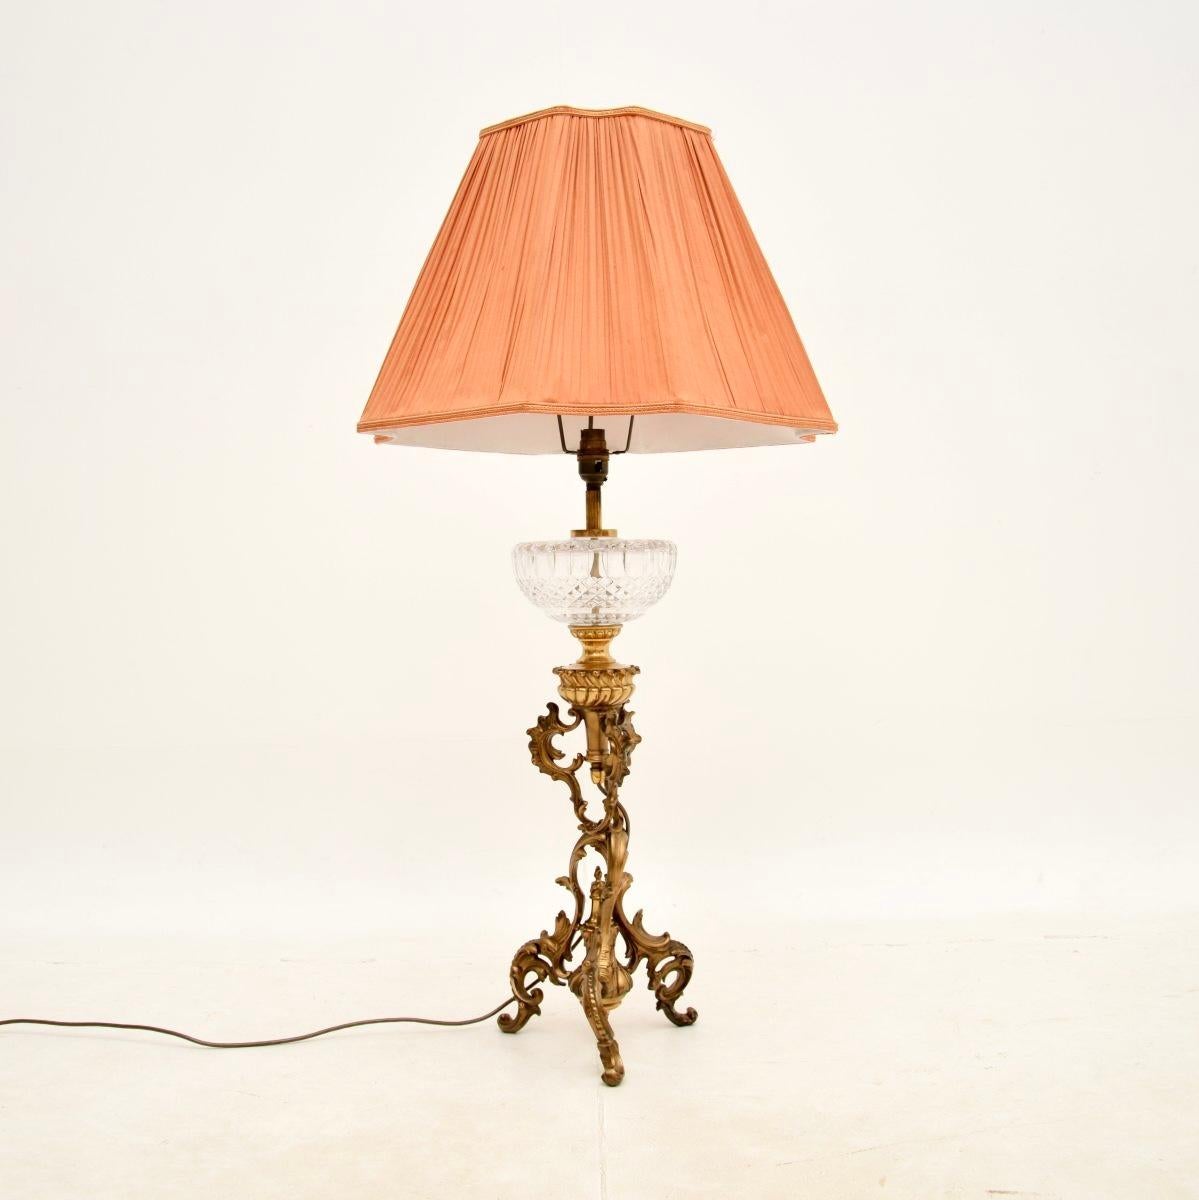 An absolutely stunning antique French gilt bronze and crystal glass table lamp. This was made in France and dates from around the 1900-10 period.

The quality is outstanding, this is large and impressive, standing at nearly a meter tall with the